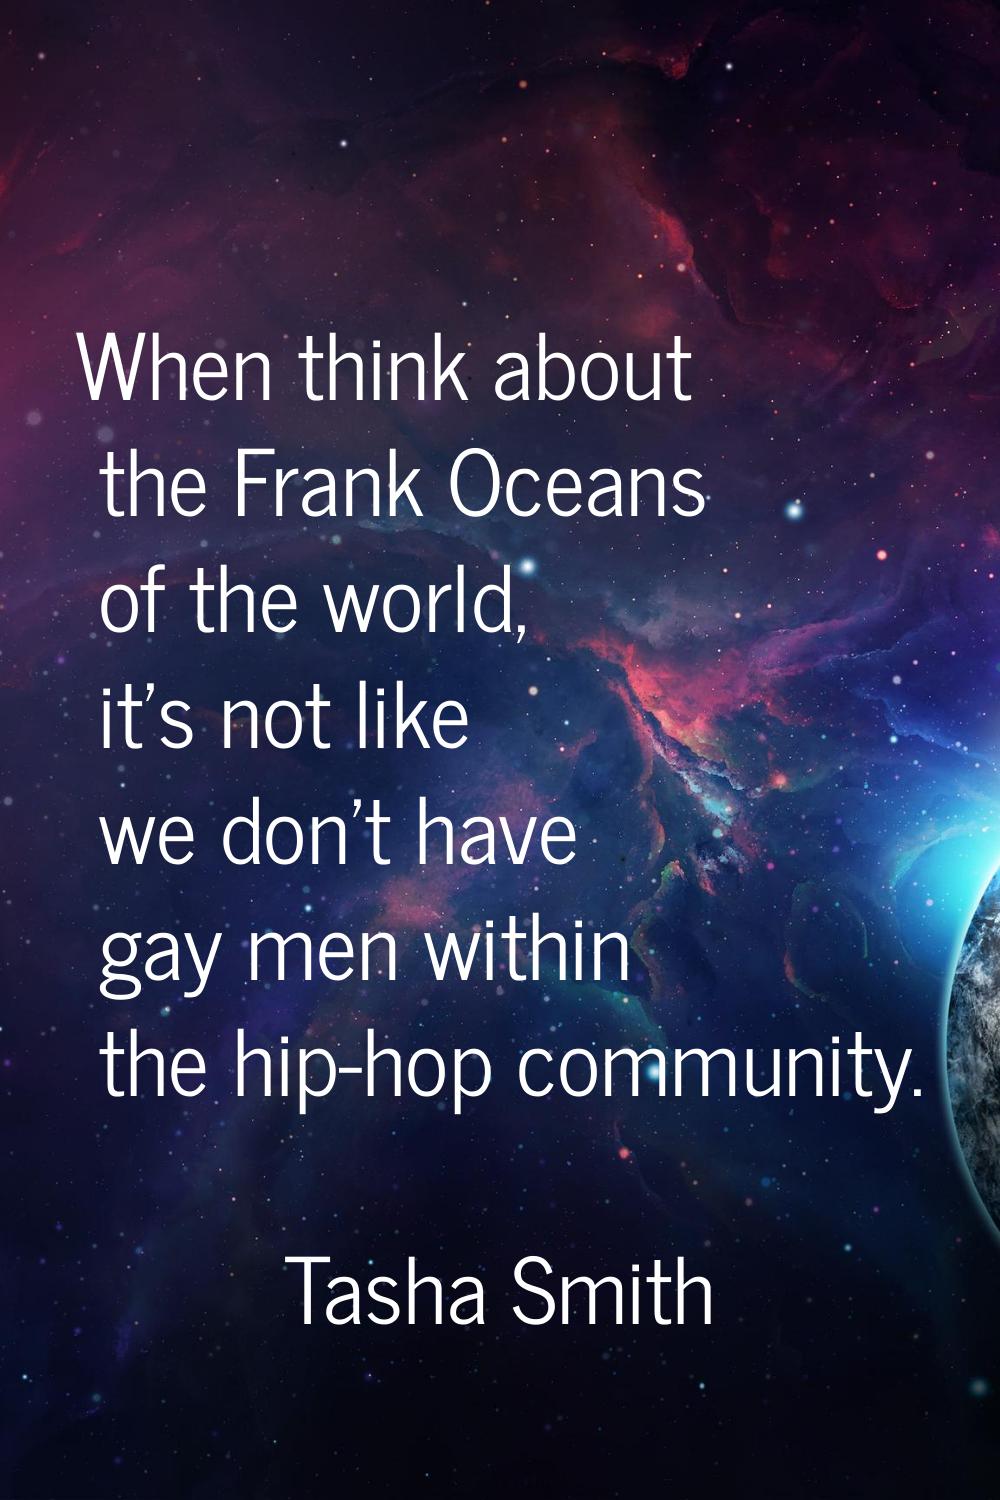 When think about the Frank Oceans of the world, it's not like we don't have gay men within the hip-